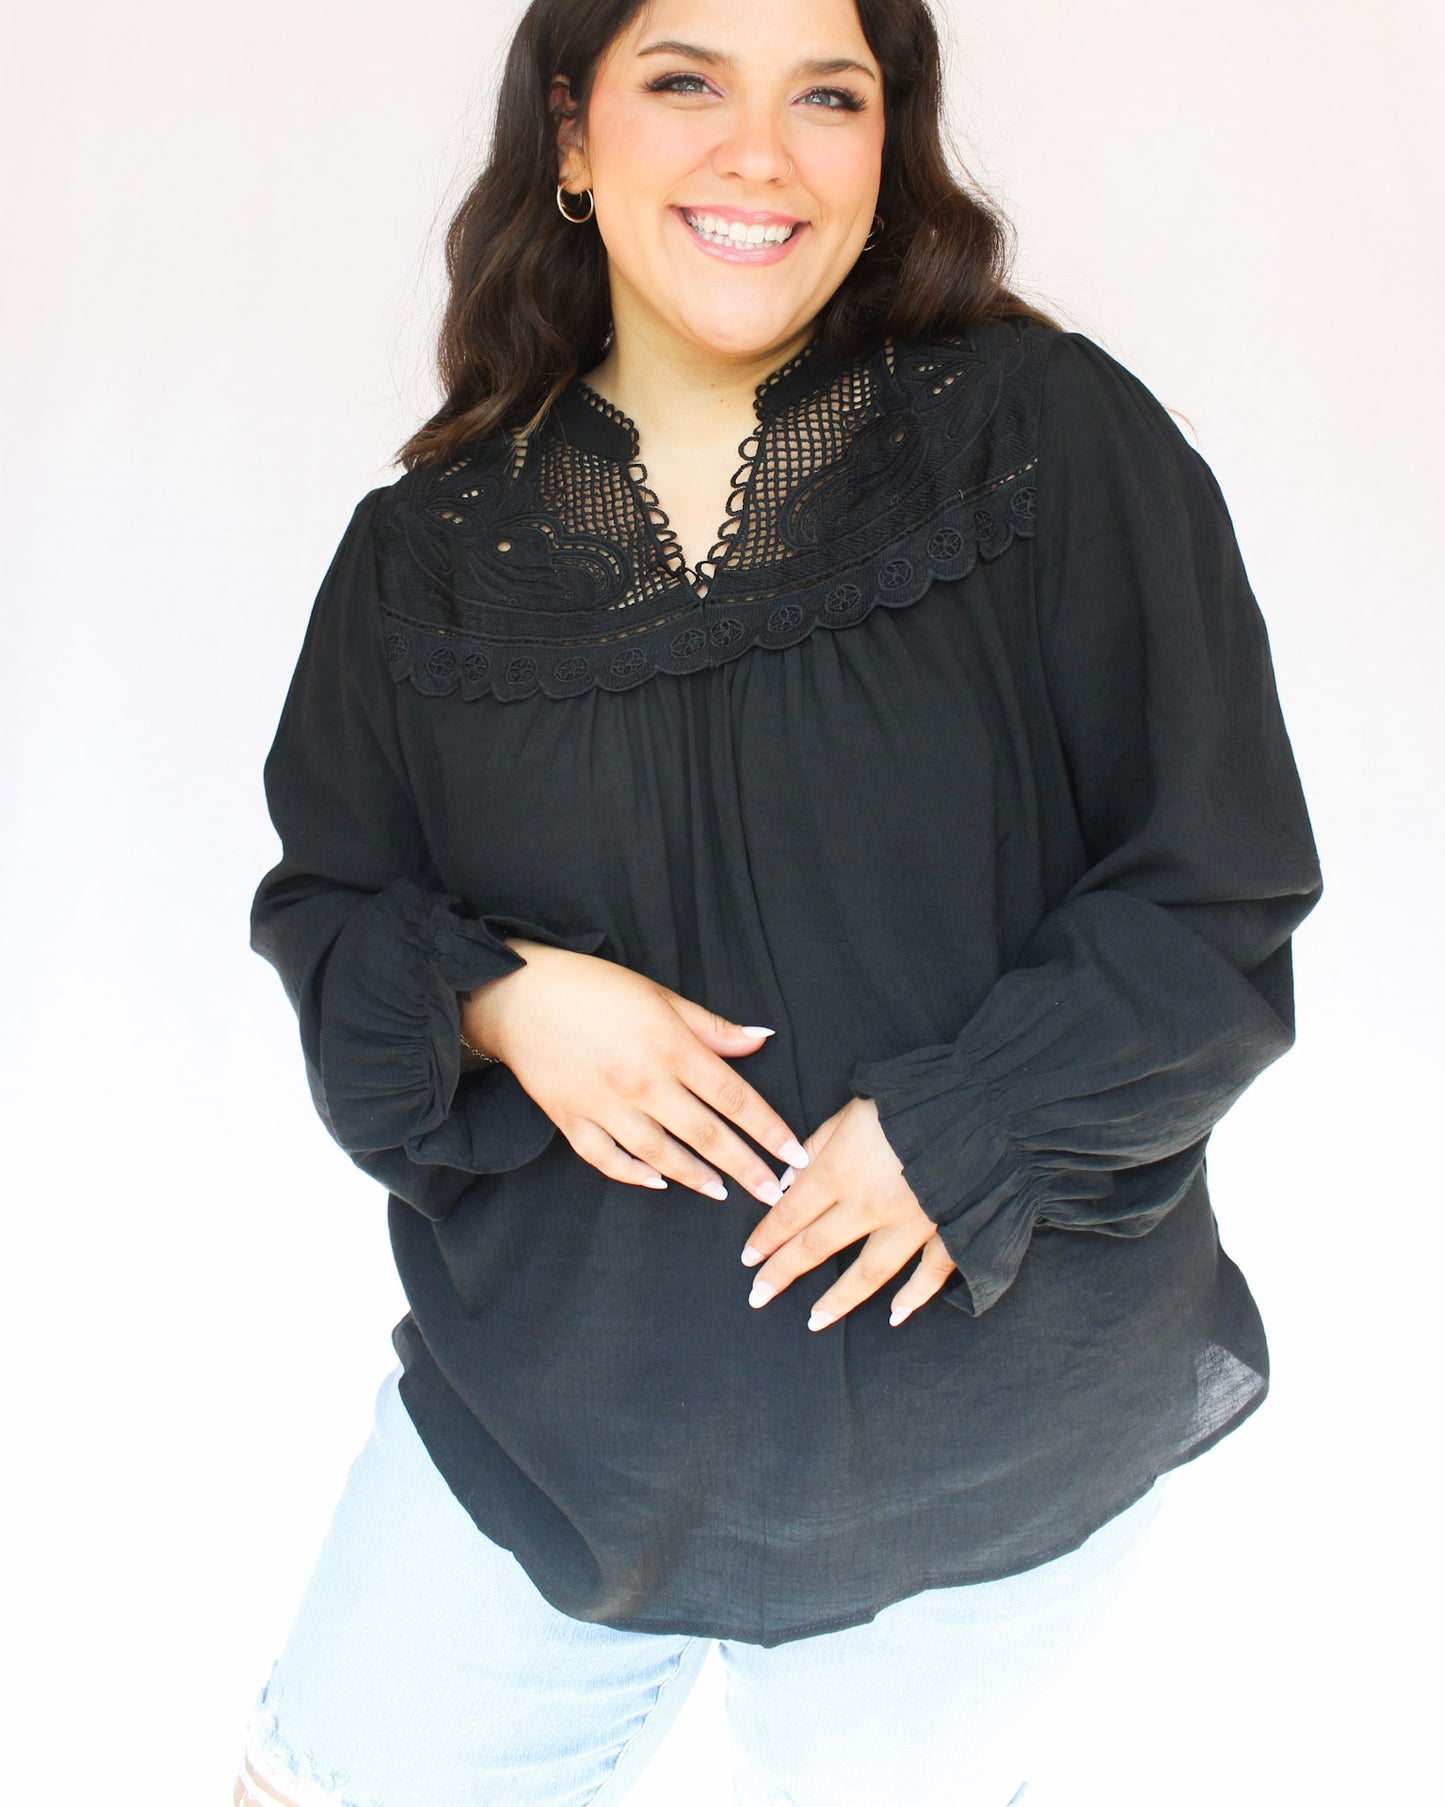 Long sleeve black top with lace detailing on the front collar and top of the blouse in a v-neckline